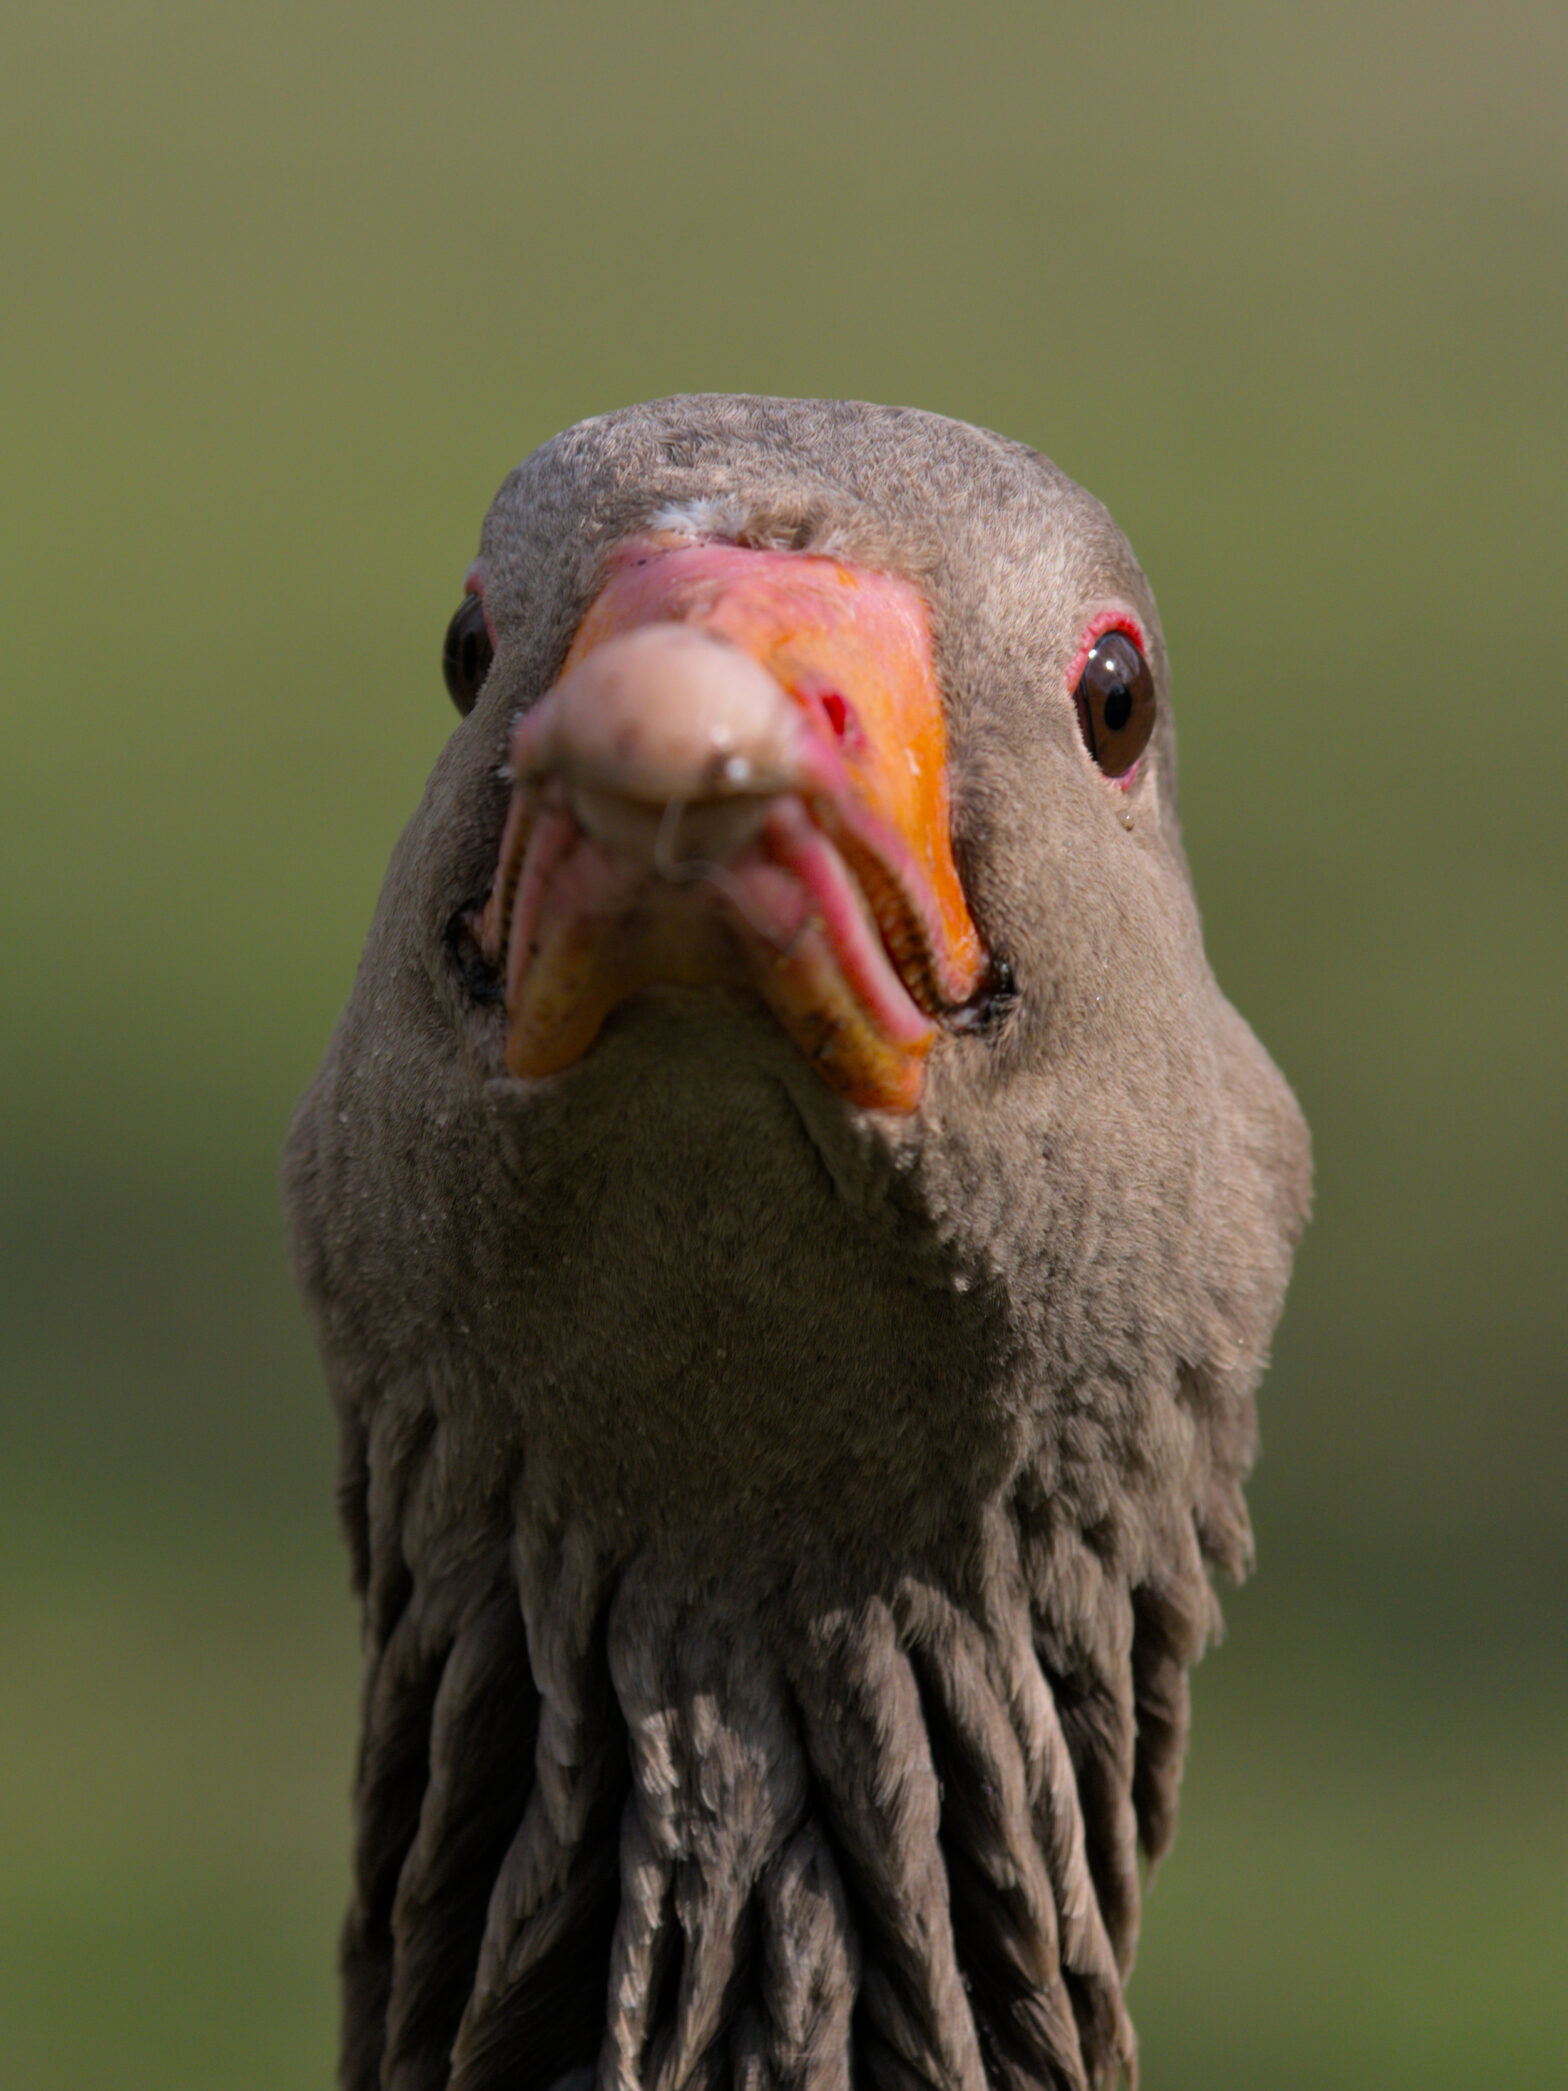 The head and upper neck of a greylag goose fill the frame, facing the camera